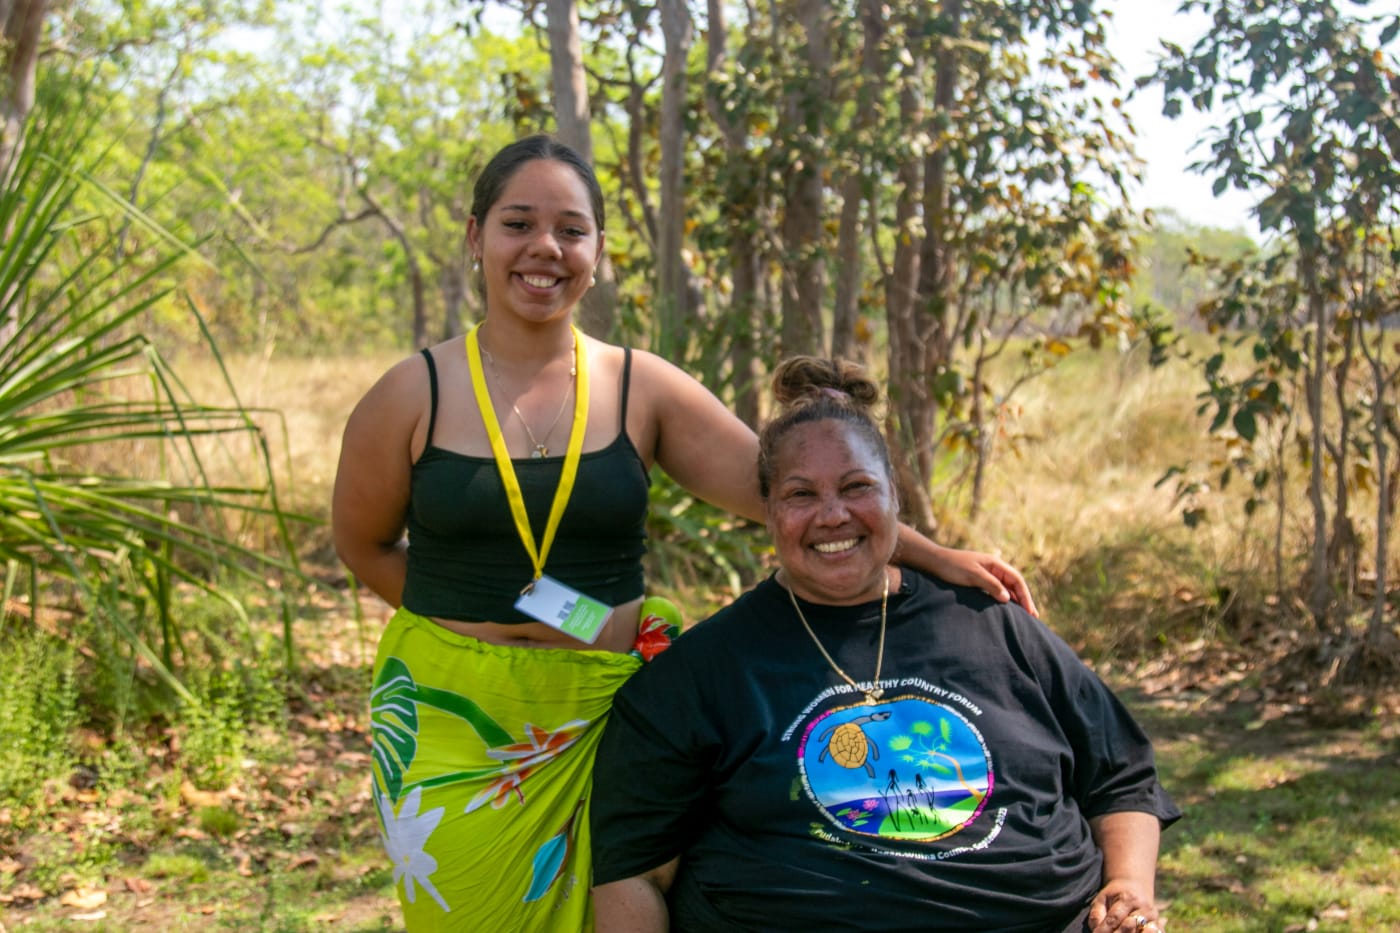 Arrernte woman from Mparntwe (Alice Springs) and Central Land Council member Jody Kopp and her daughter, NT Youth Round Table member and young Arrernte leader Armani Francois at the 2023